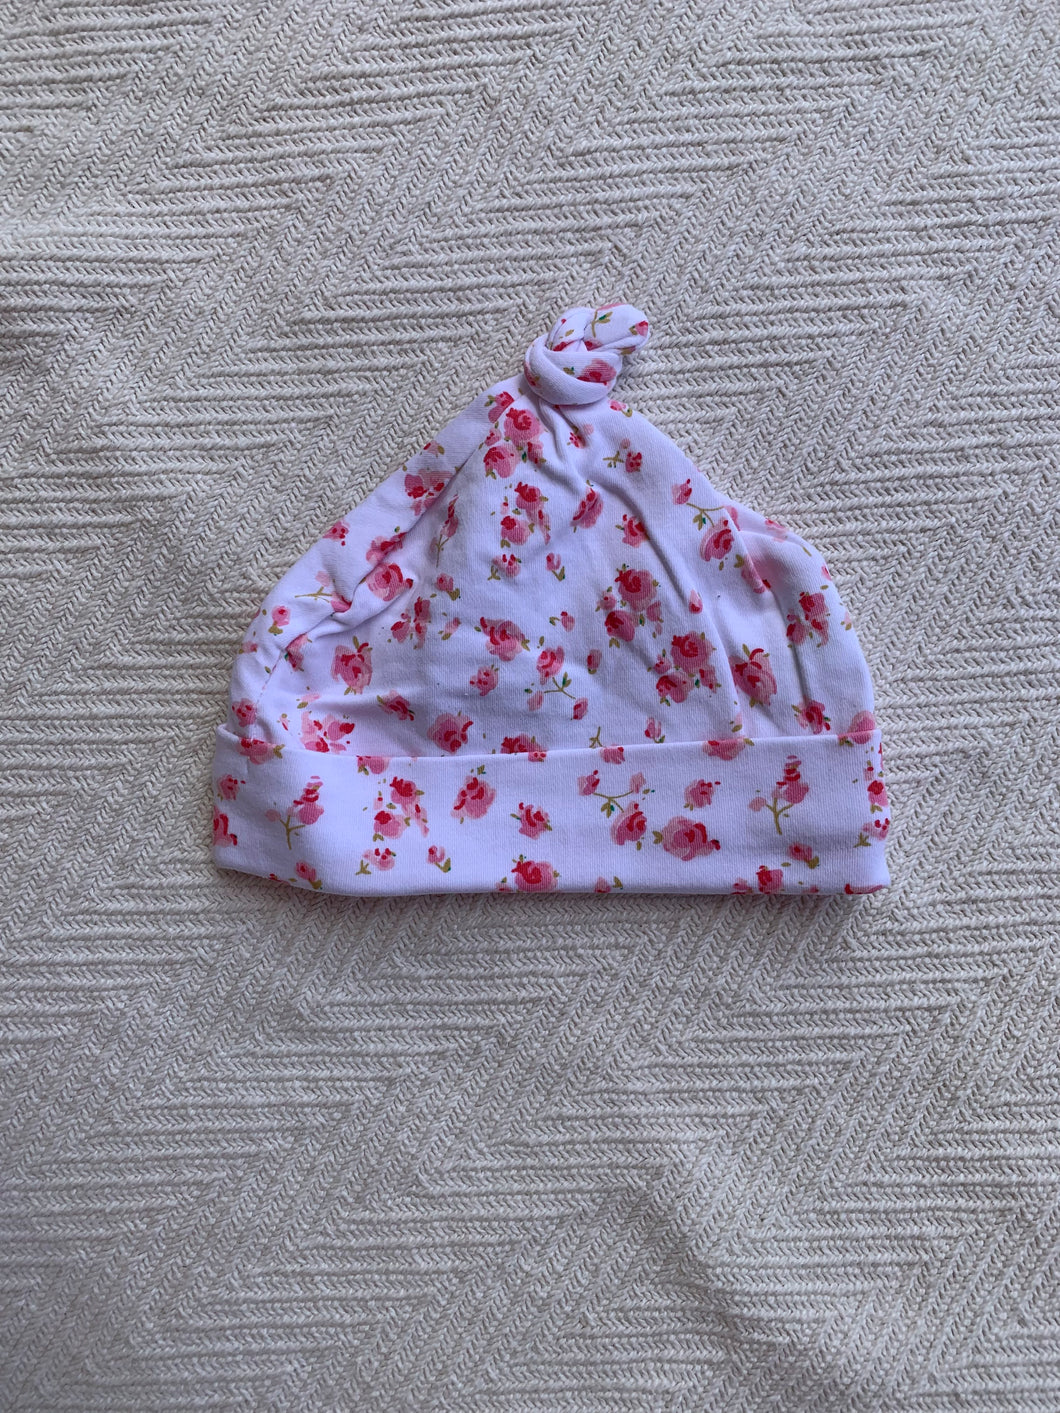 Knot Beanie - White & Pink Floral